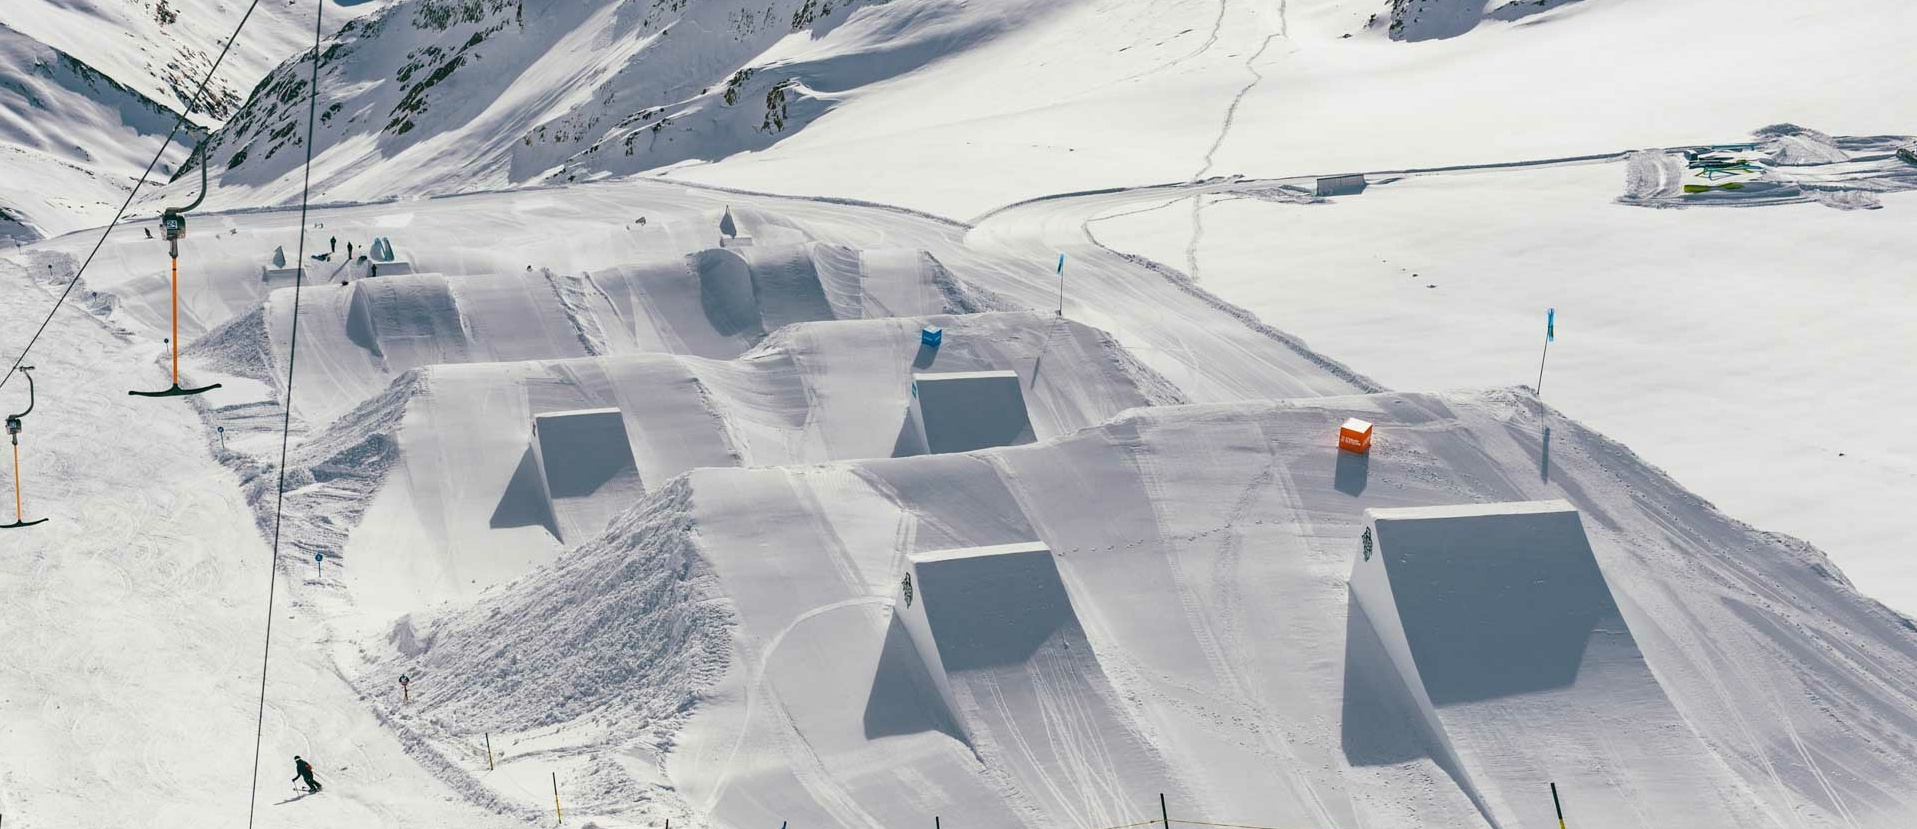 [Translate to Chinesisch:] Jumps in the snow park Stubai